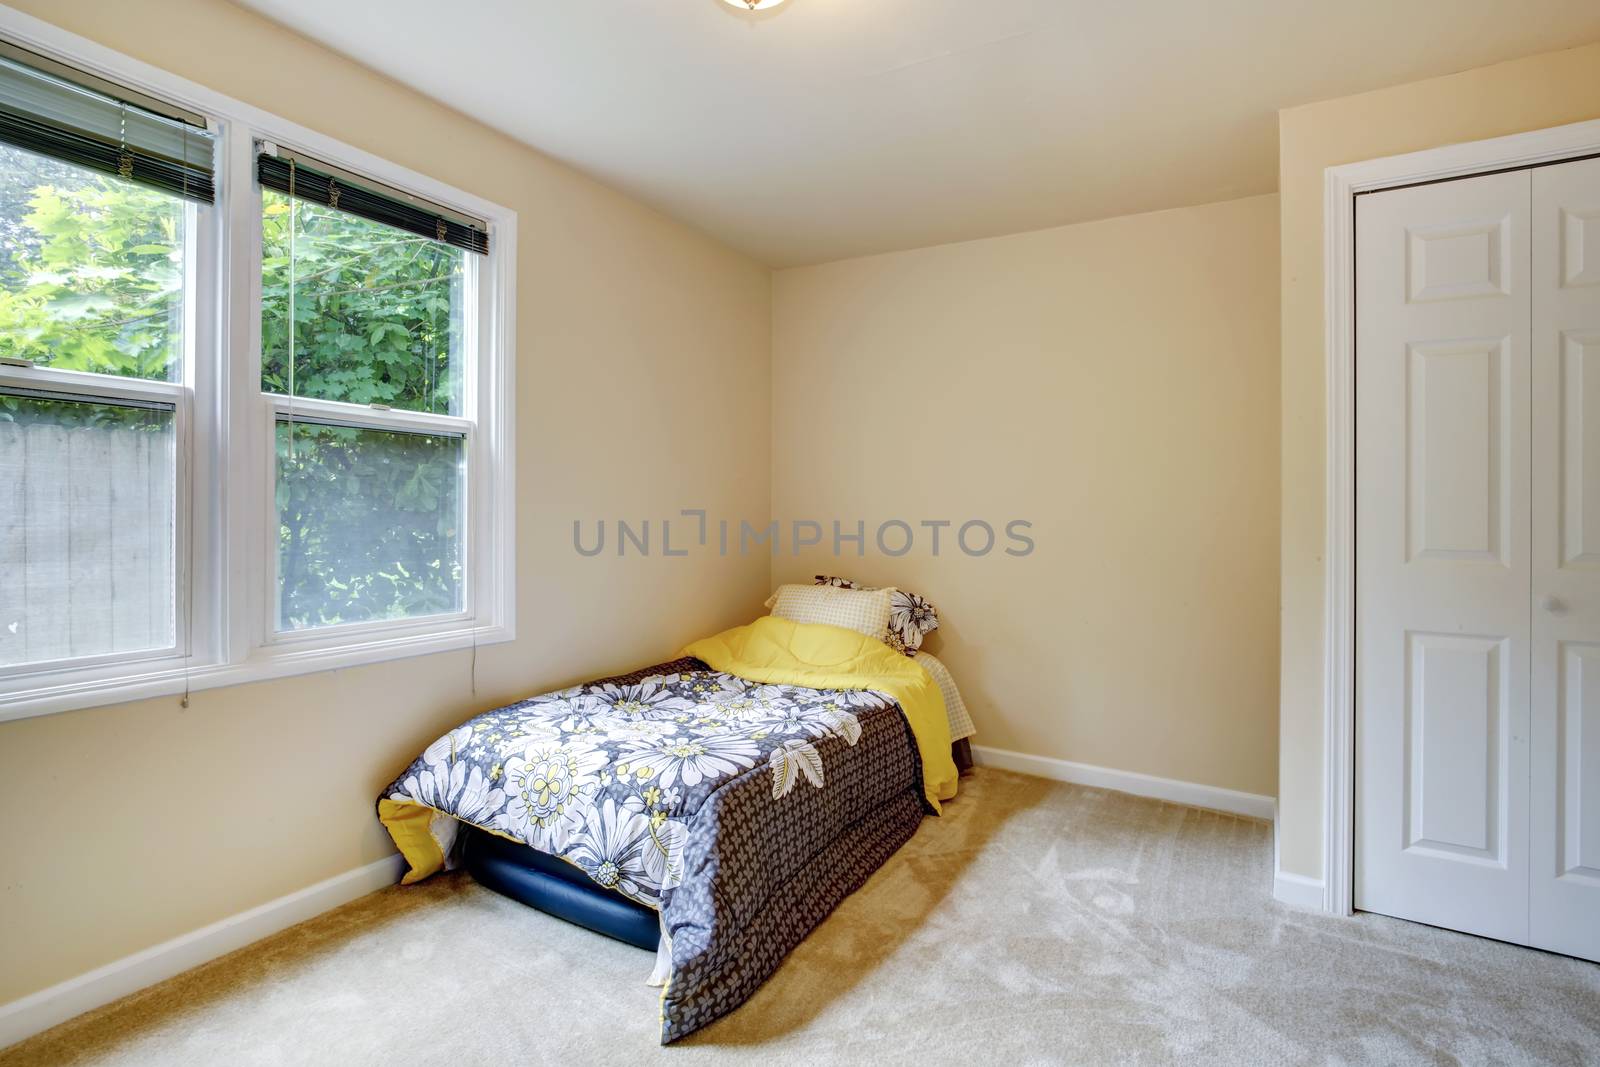 Small bedroom with window, carpet floor. View of mattress covered with floral bedding